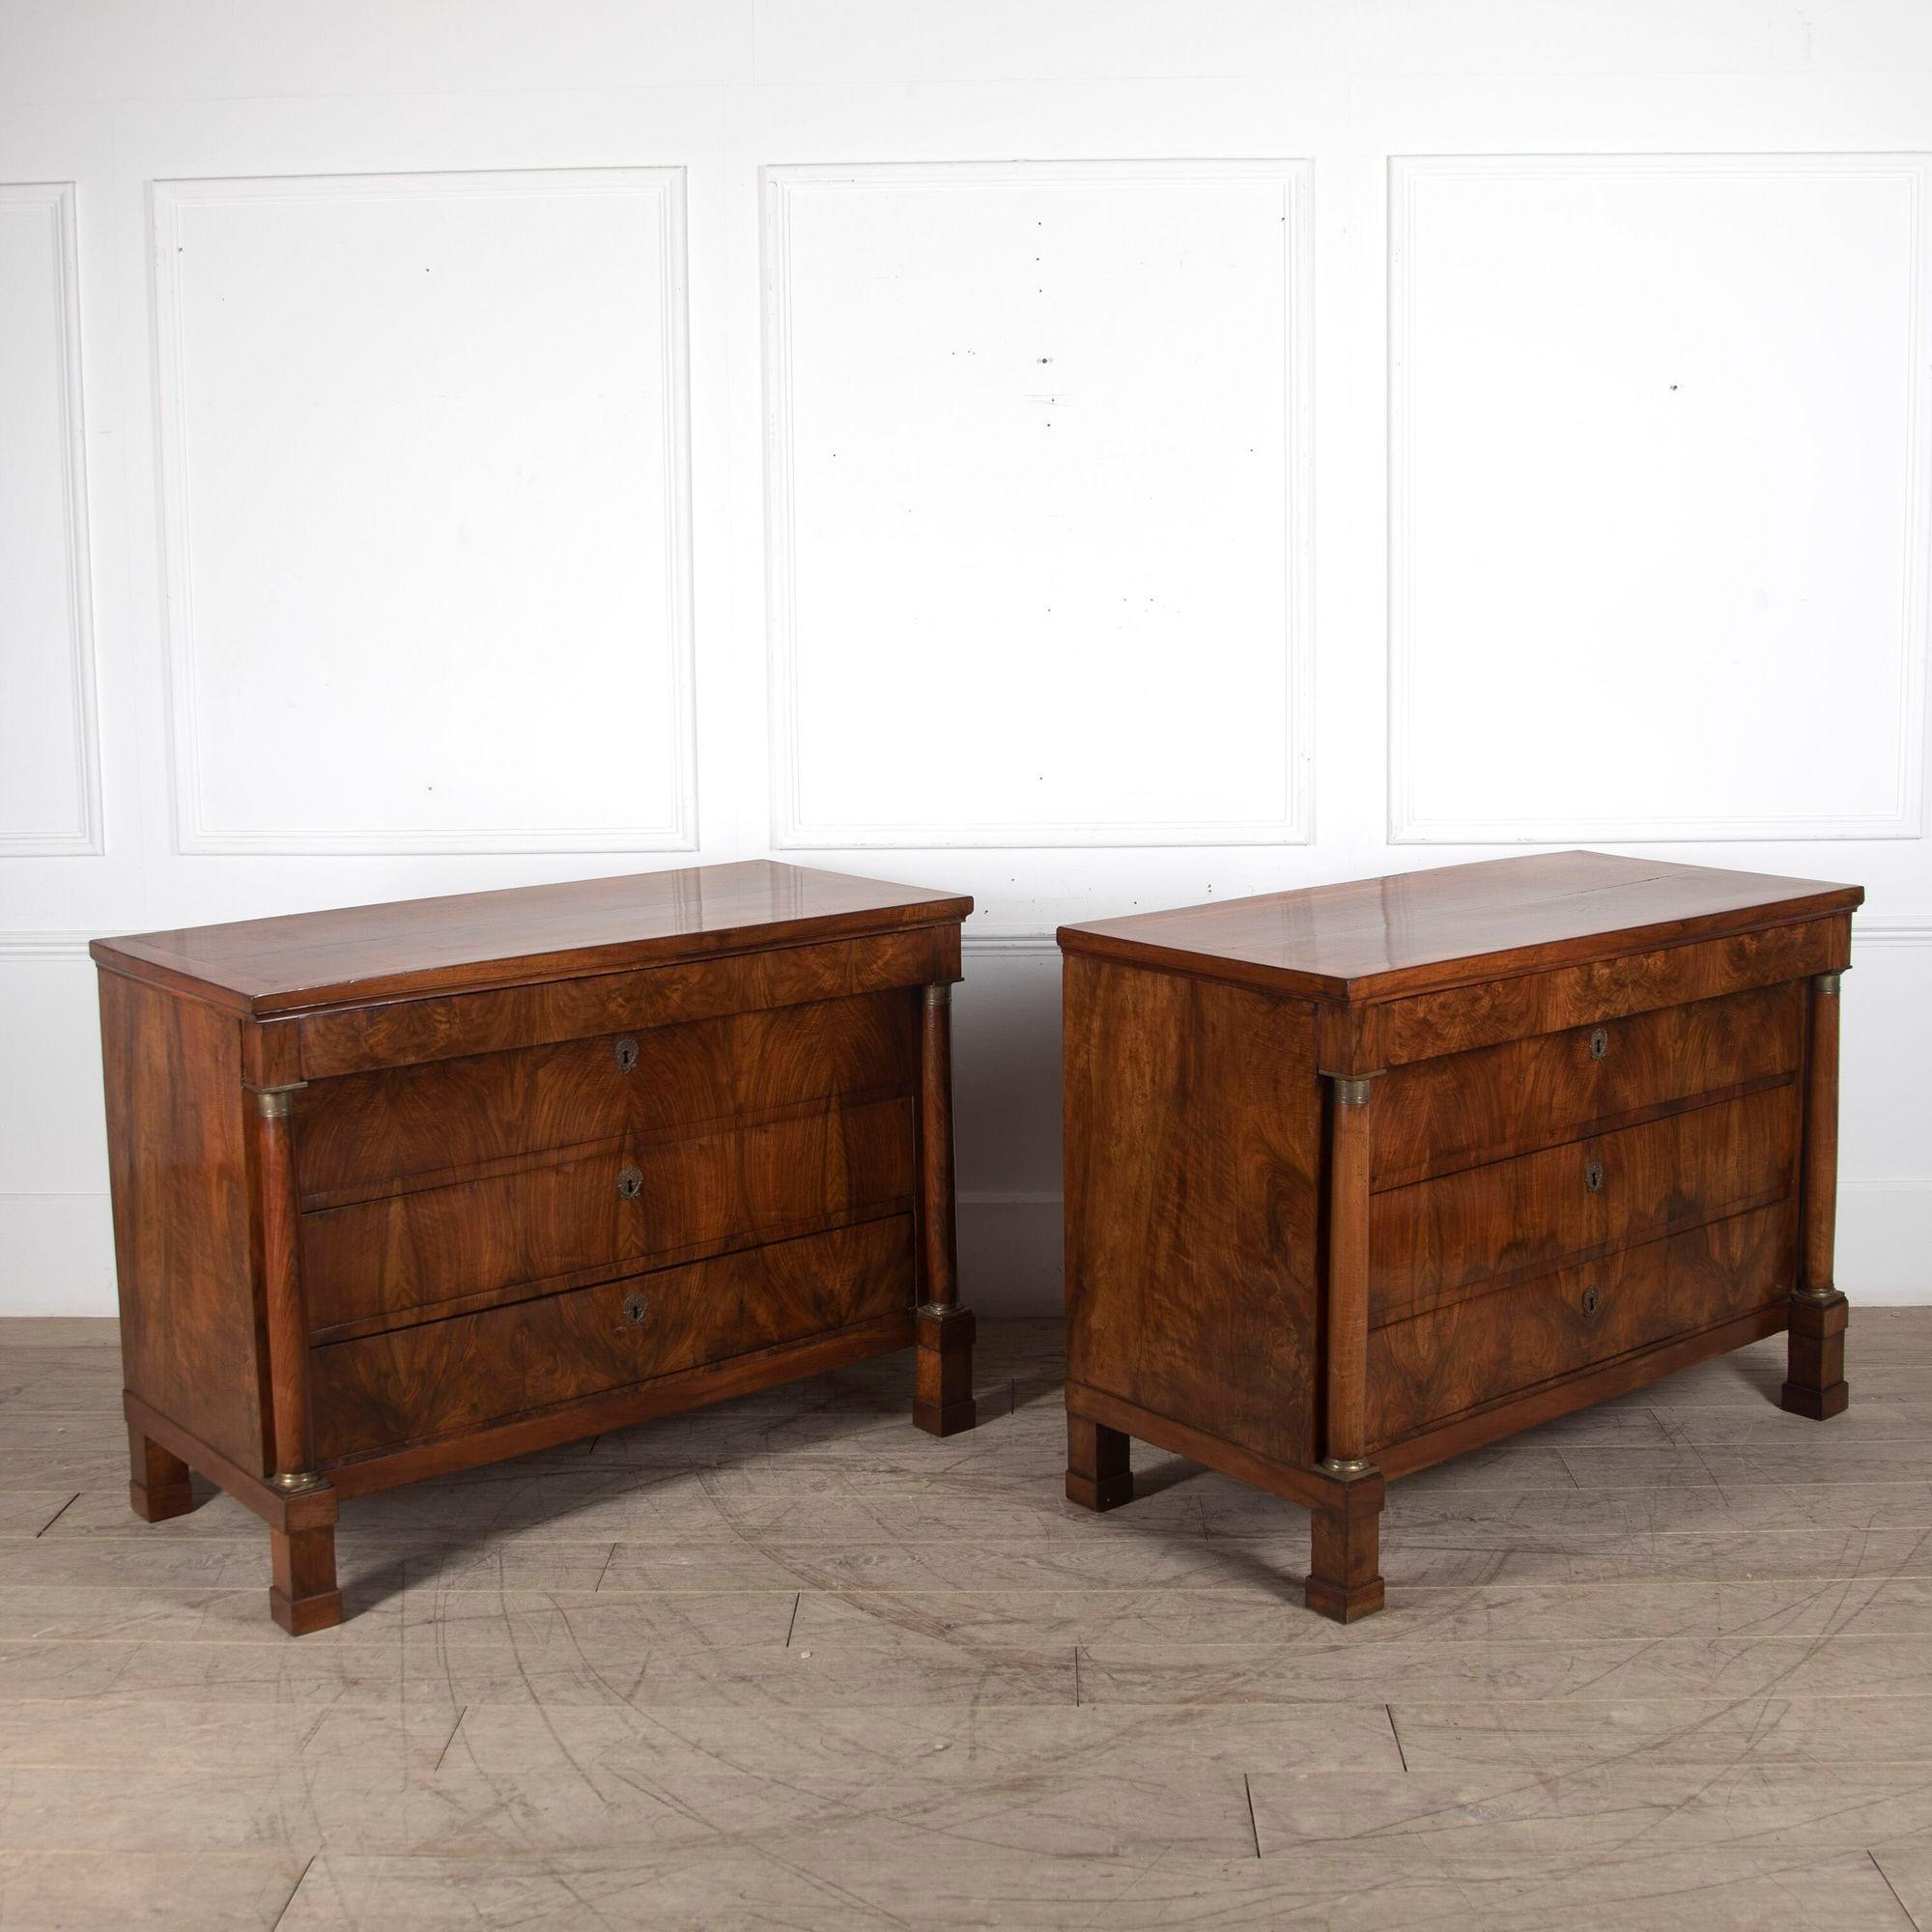 Pair of 19th Century Italian commodes with wonderful rosewood figuring.
These chests consist of three recessed drawers and a flush drawer above. The chests have two columns on either side with ormolu mounts.
A superb pair that would look fabulous